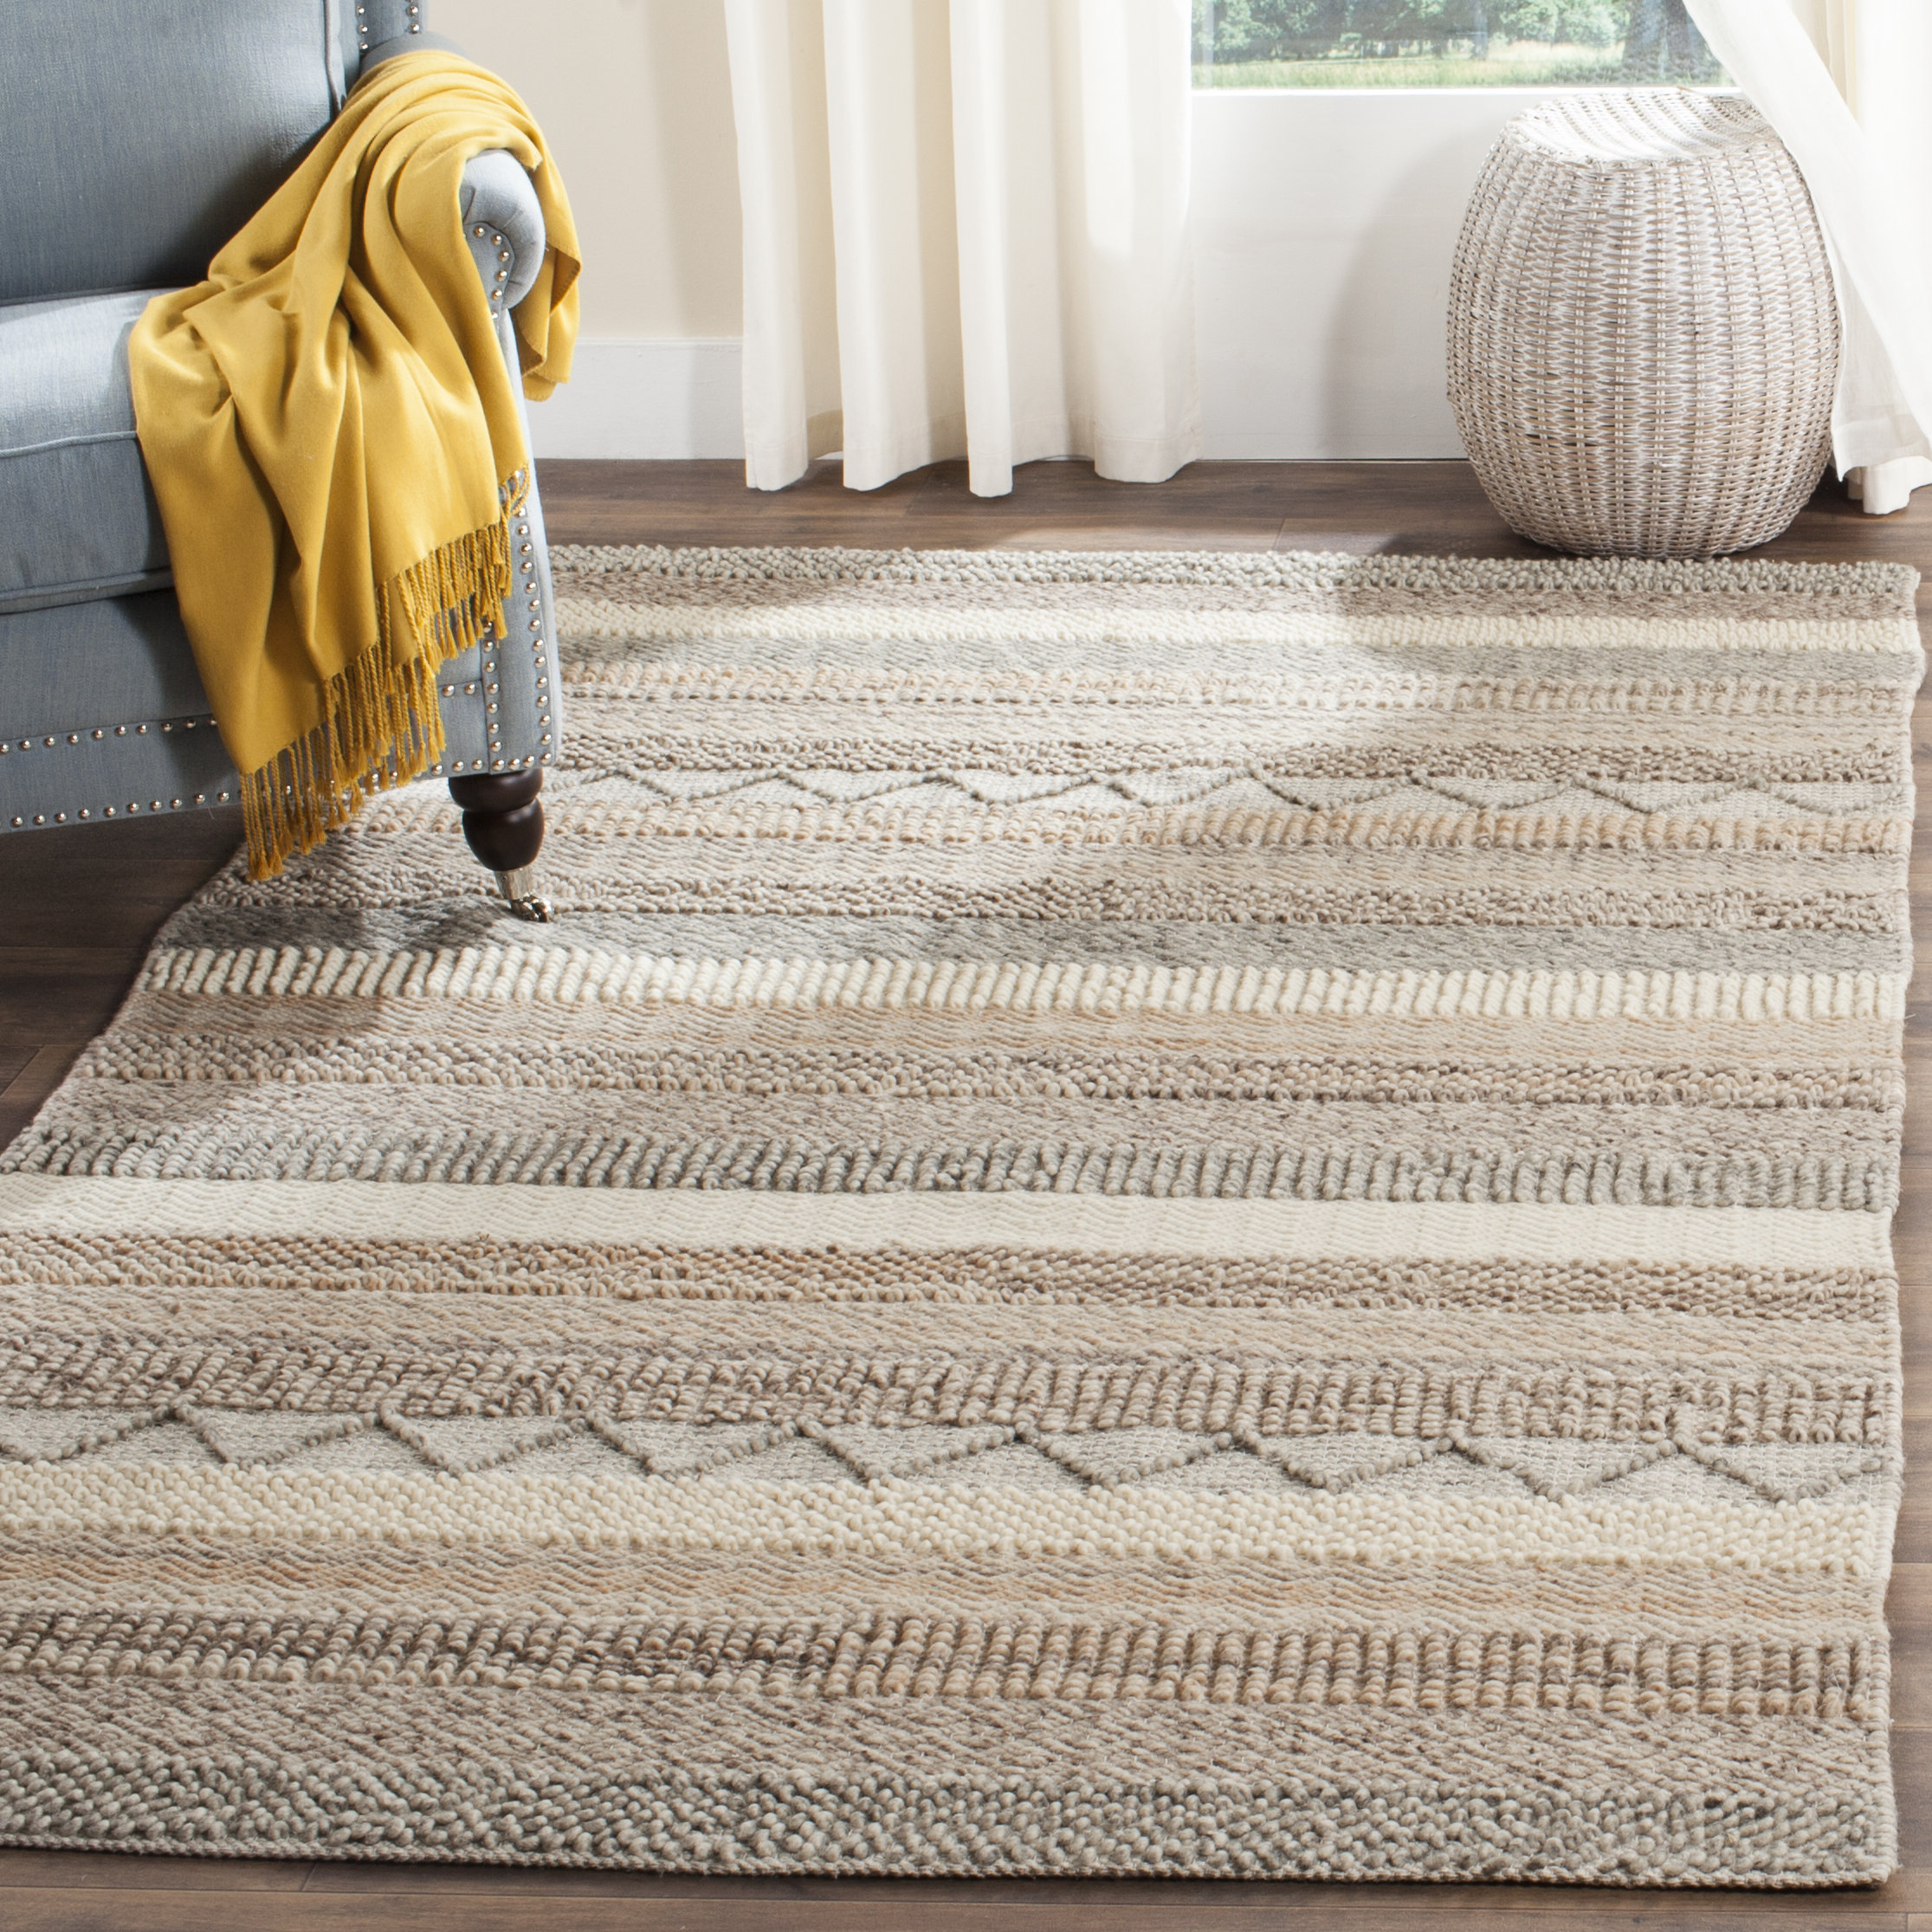 Chobi Finest Bordered Ivory Rug 4'3 x 6'0 eCarpet Gallery Area Rug for Living Room Bedroom Hand-Knotted Wool Rug 318279 